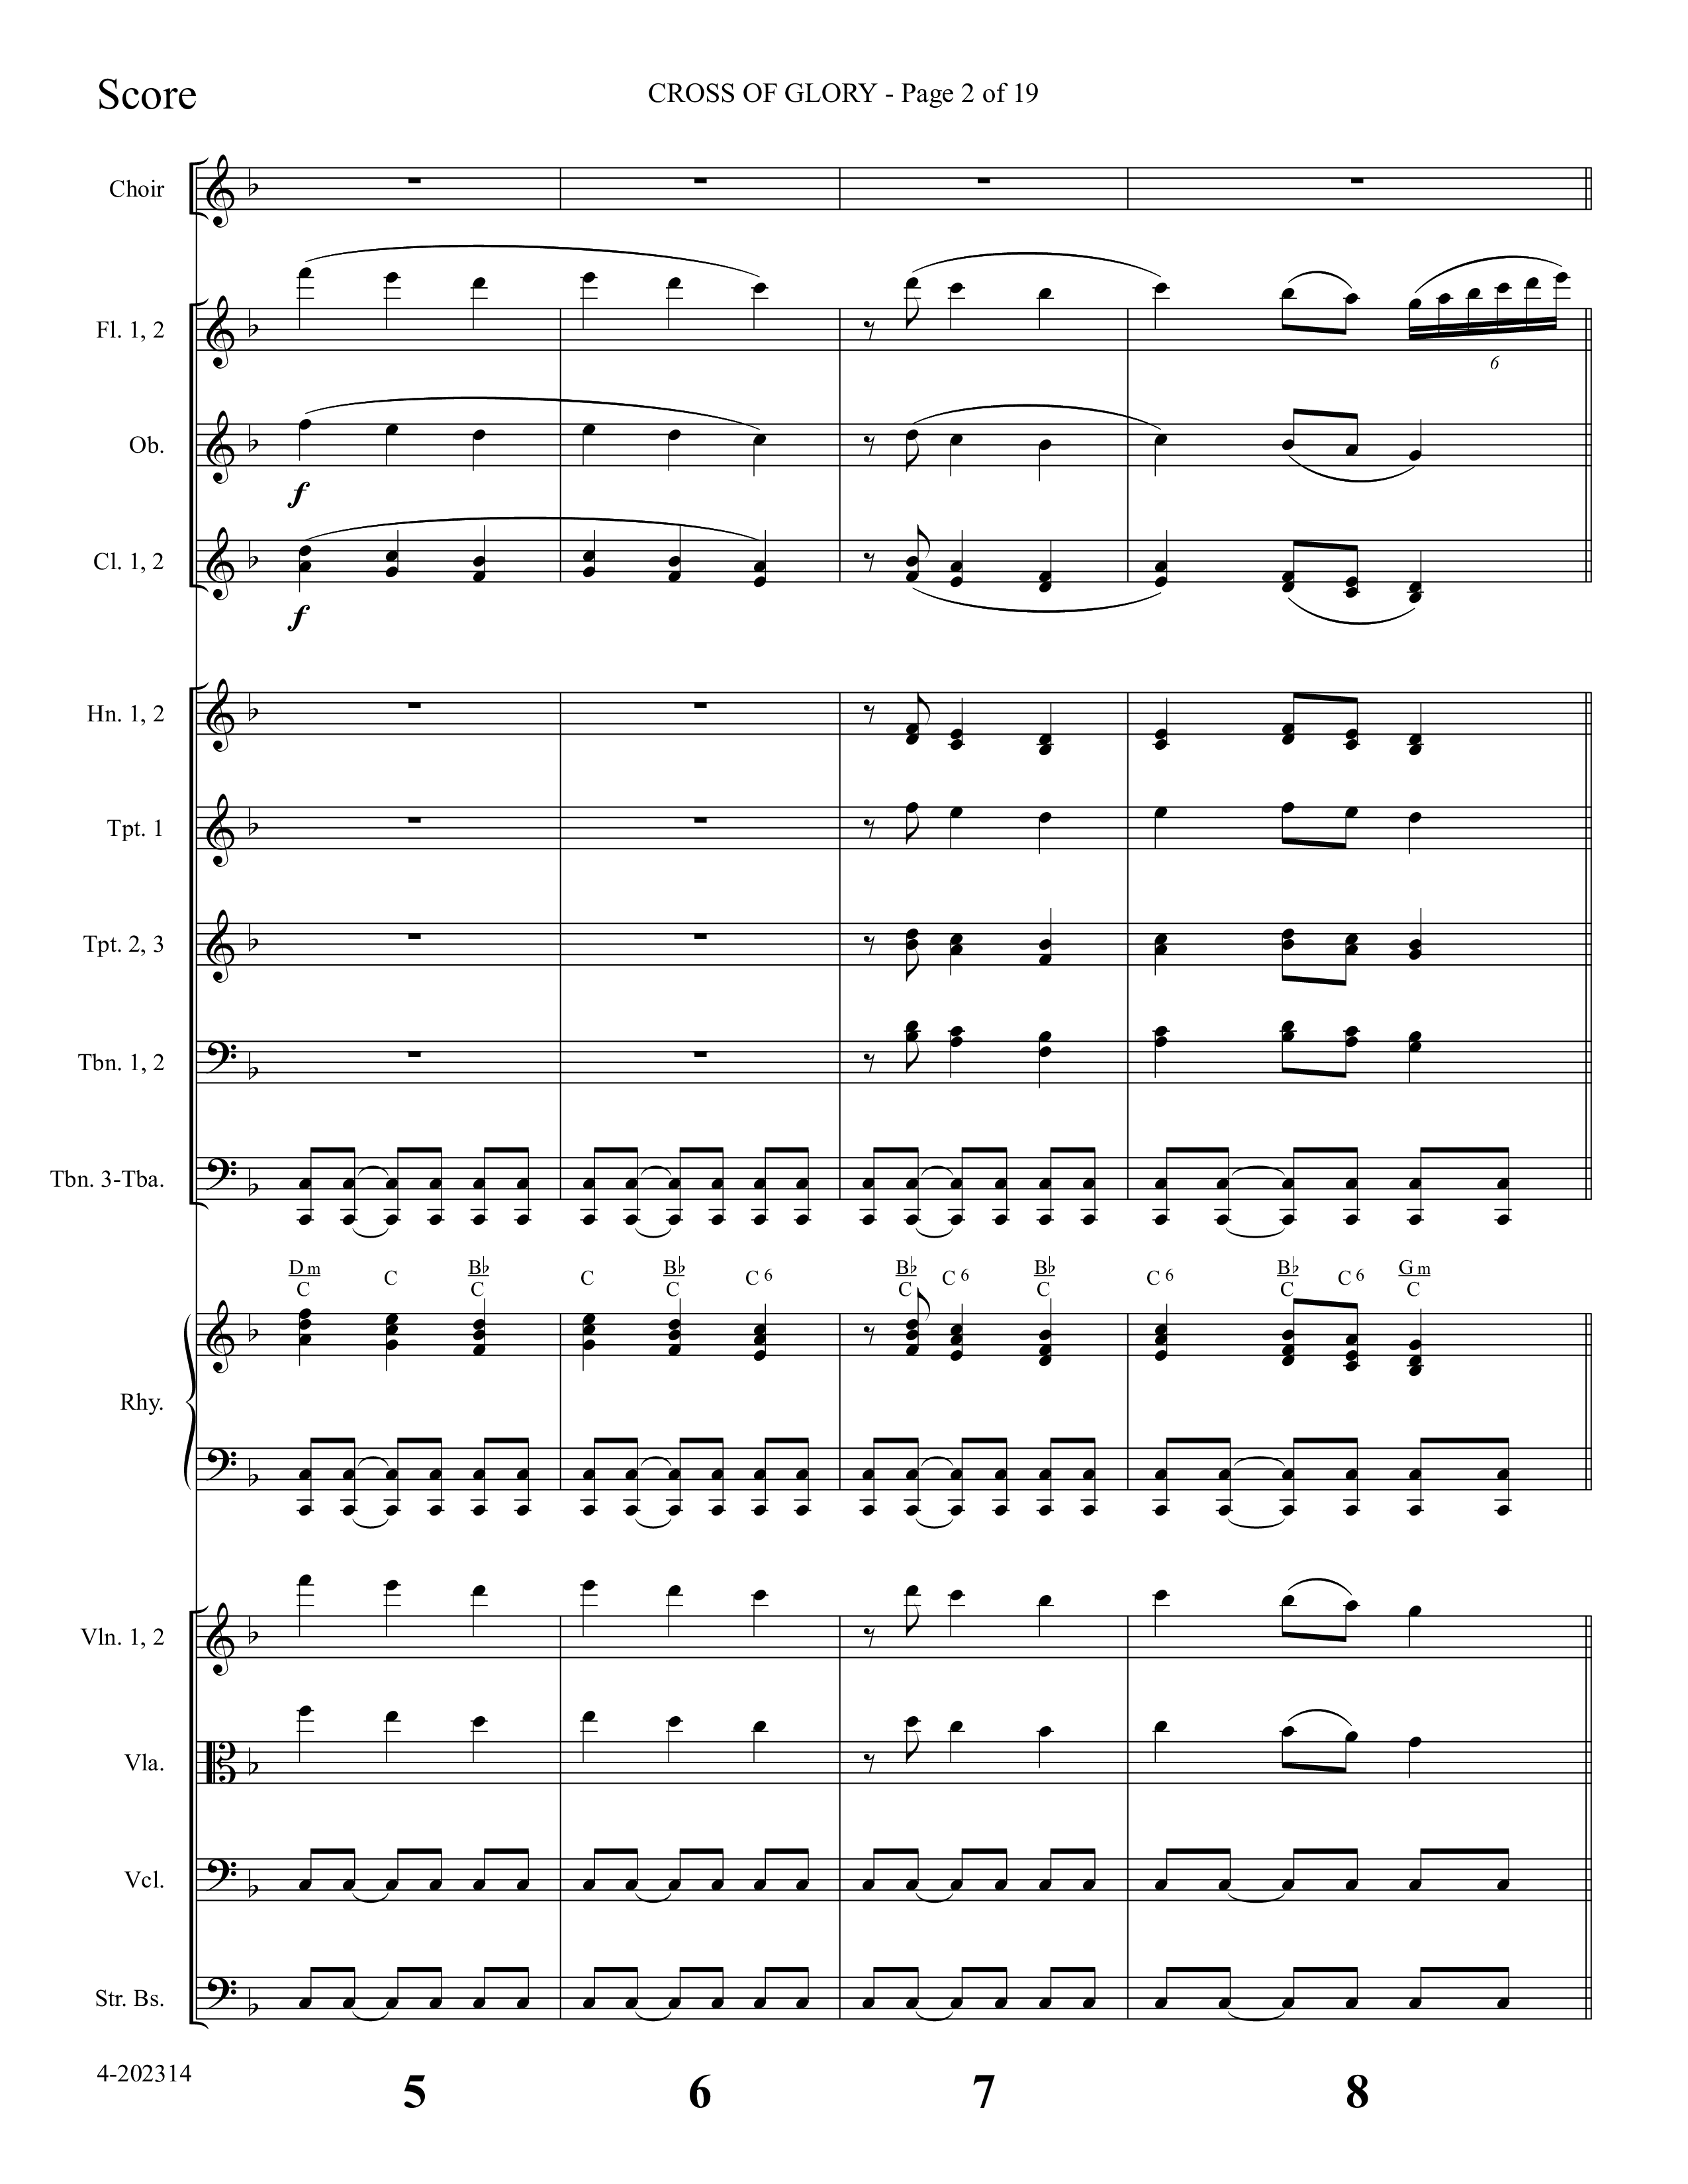 Cross Of Glory (Choral Anthem SATB) Orchestration (Foster Music Group / Arr. Marty Parks)